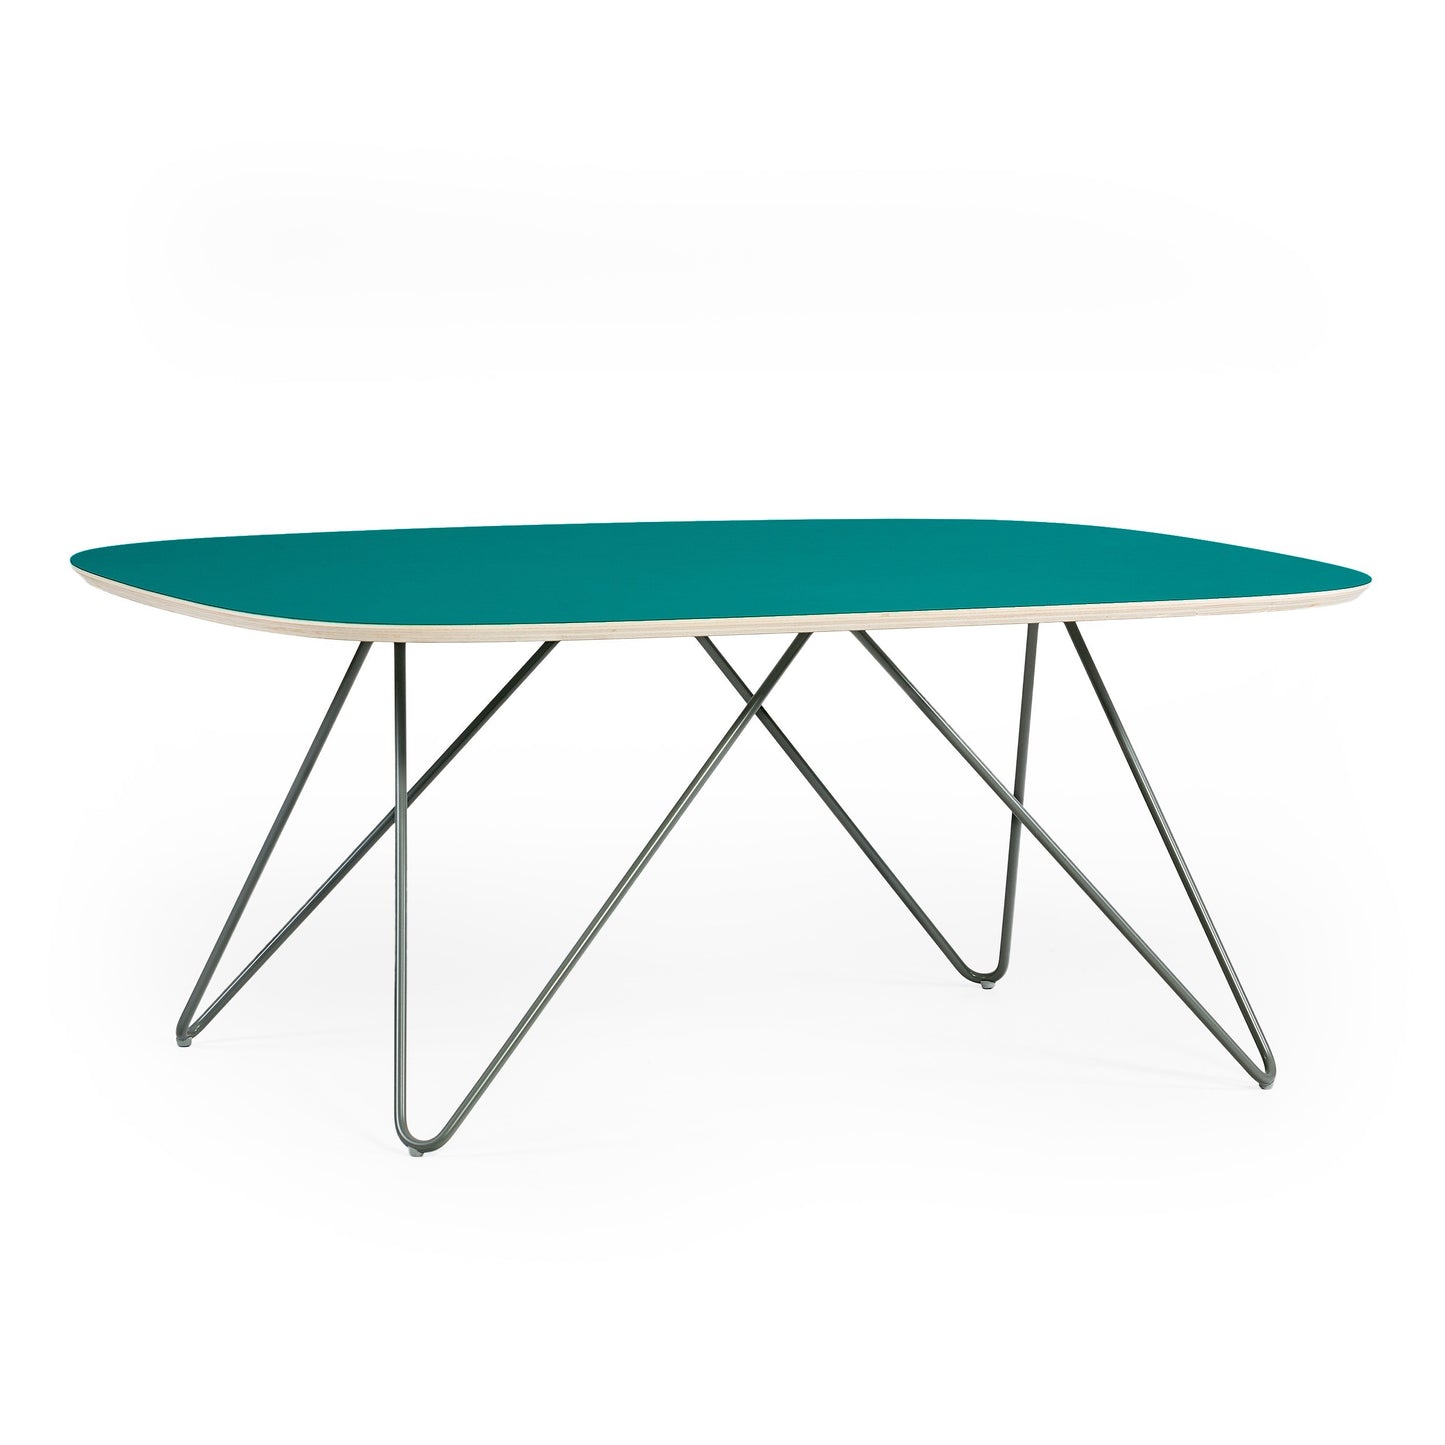 Coffee table Zig-Zag DL - Turquoise